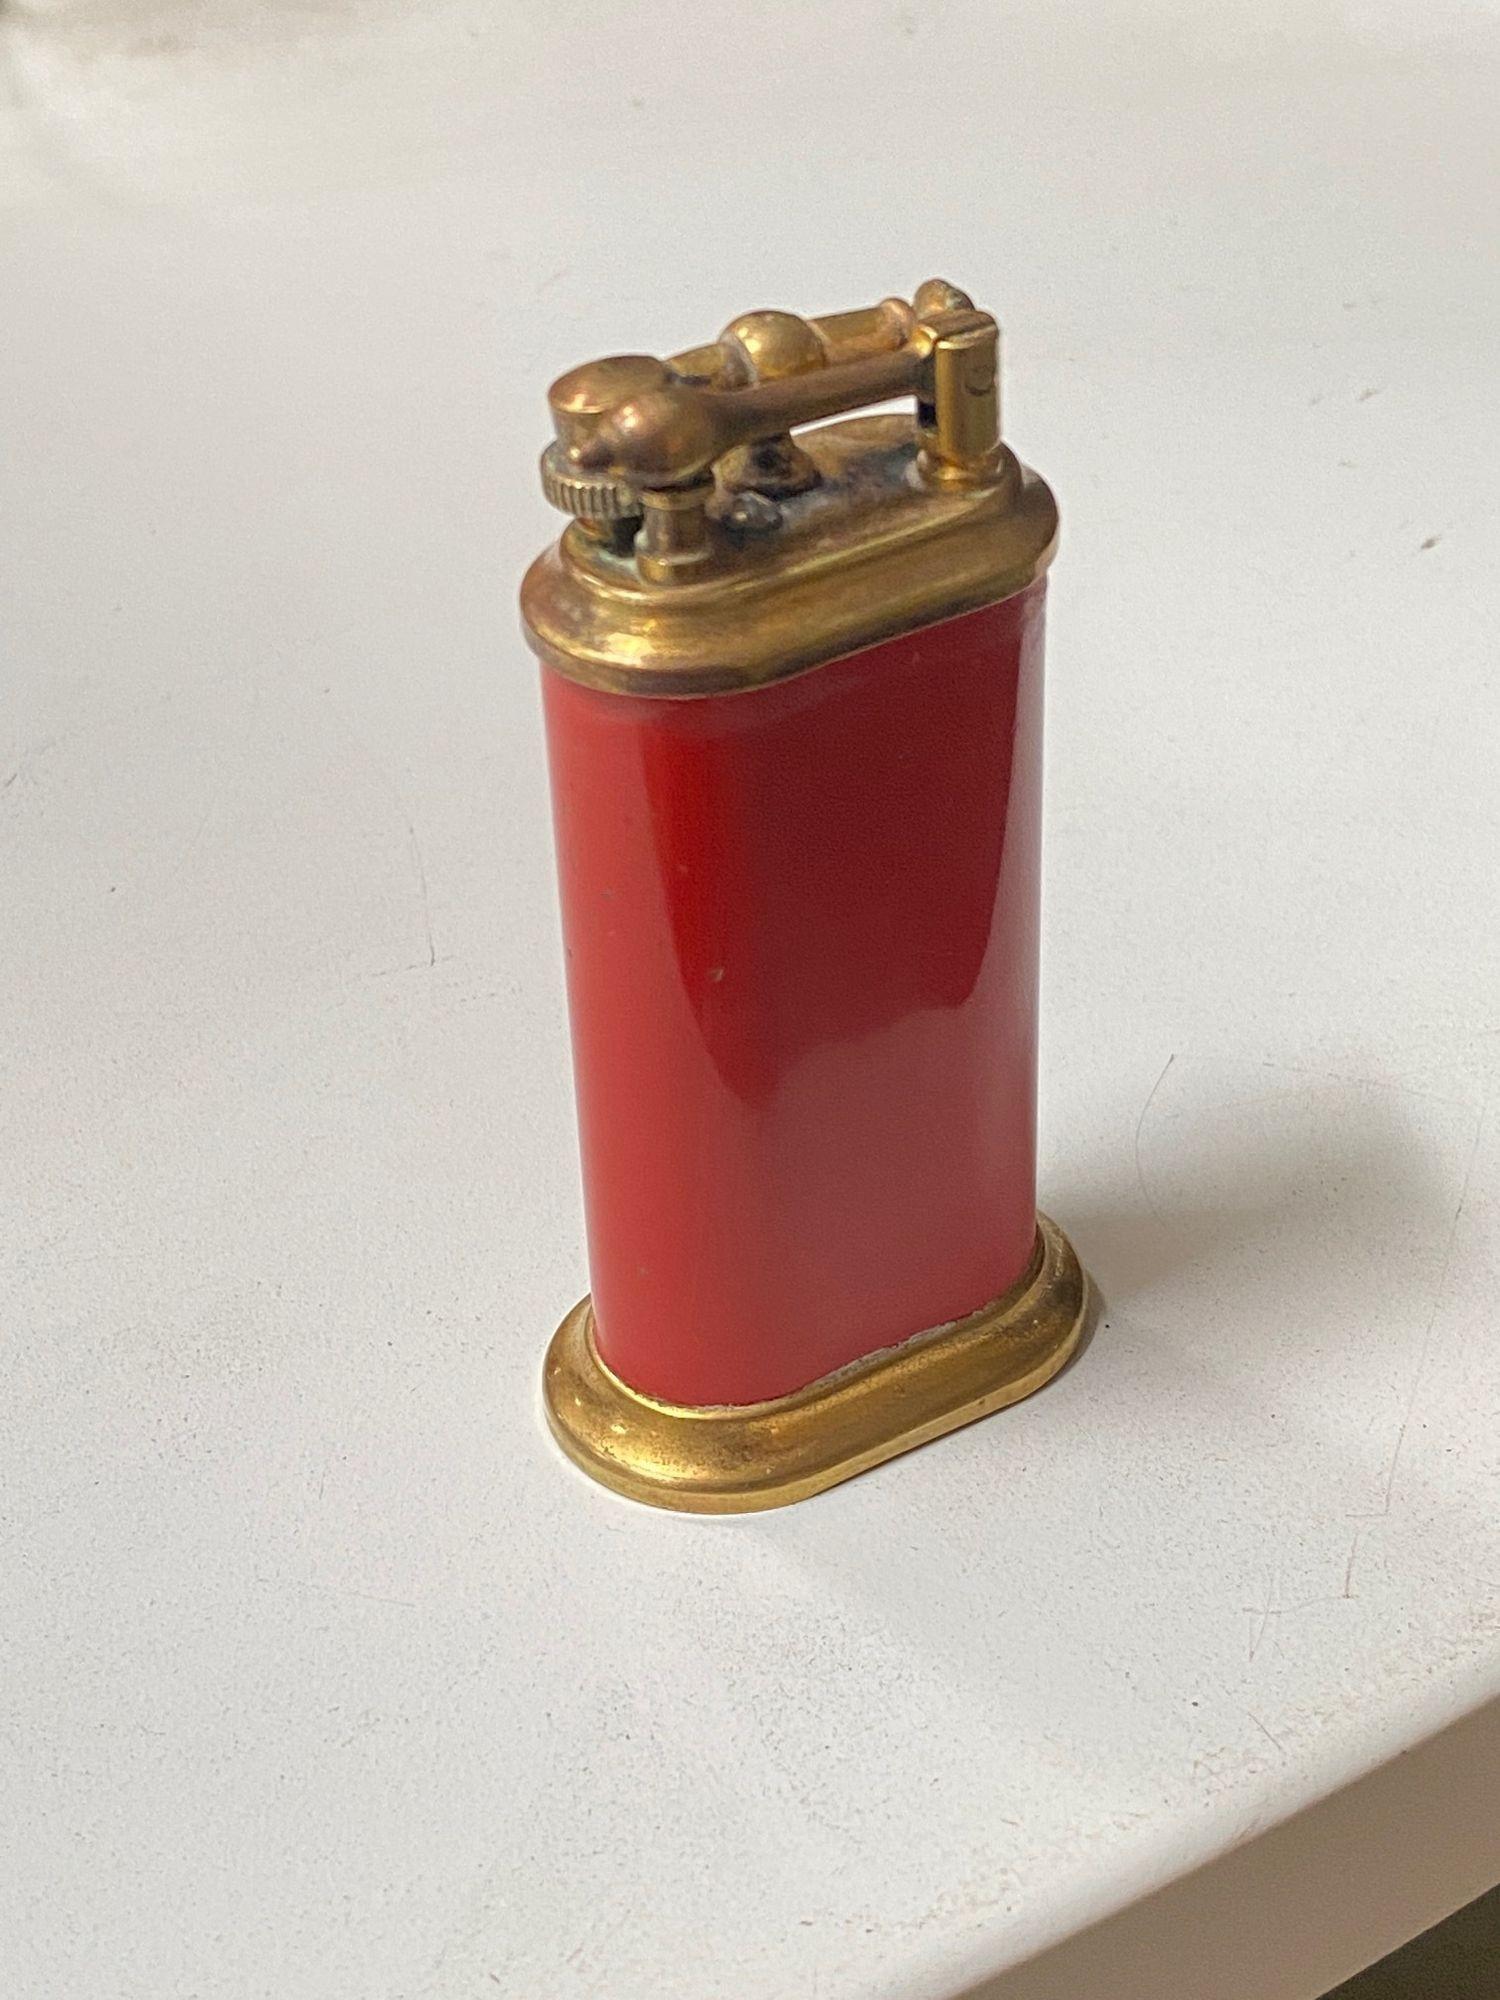 American 1930s Brass Lift Arm Table Cigarette Lighter by Park Sherman